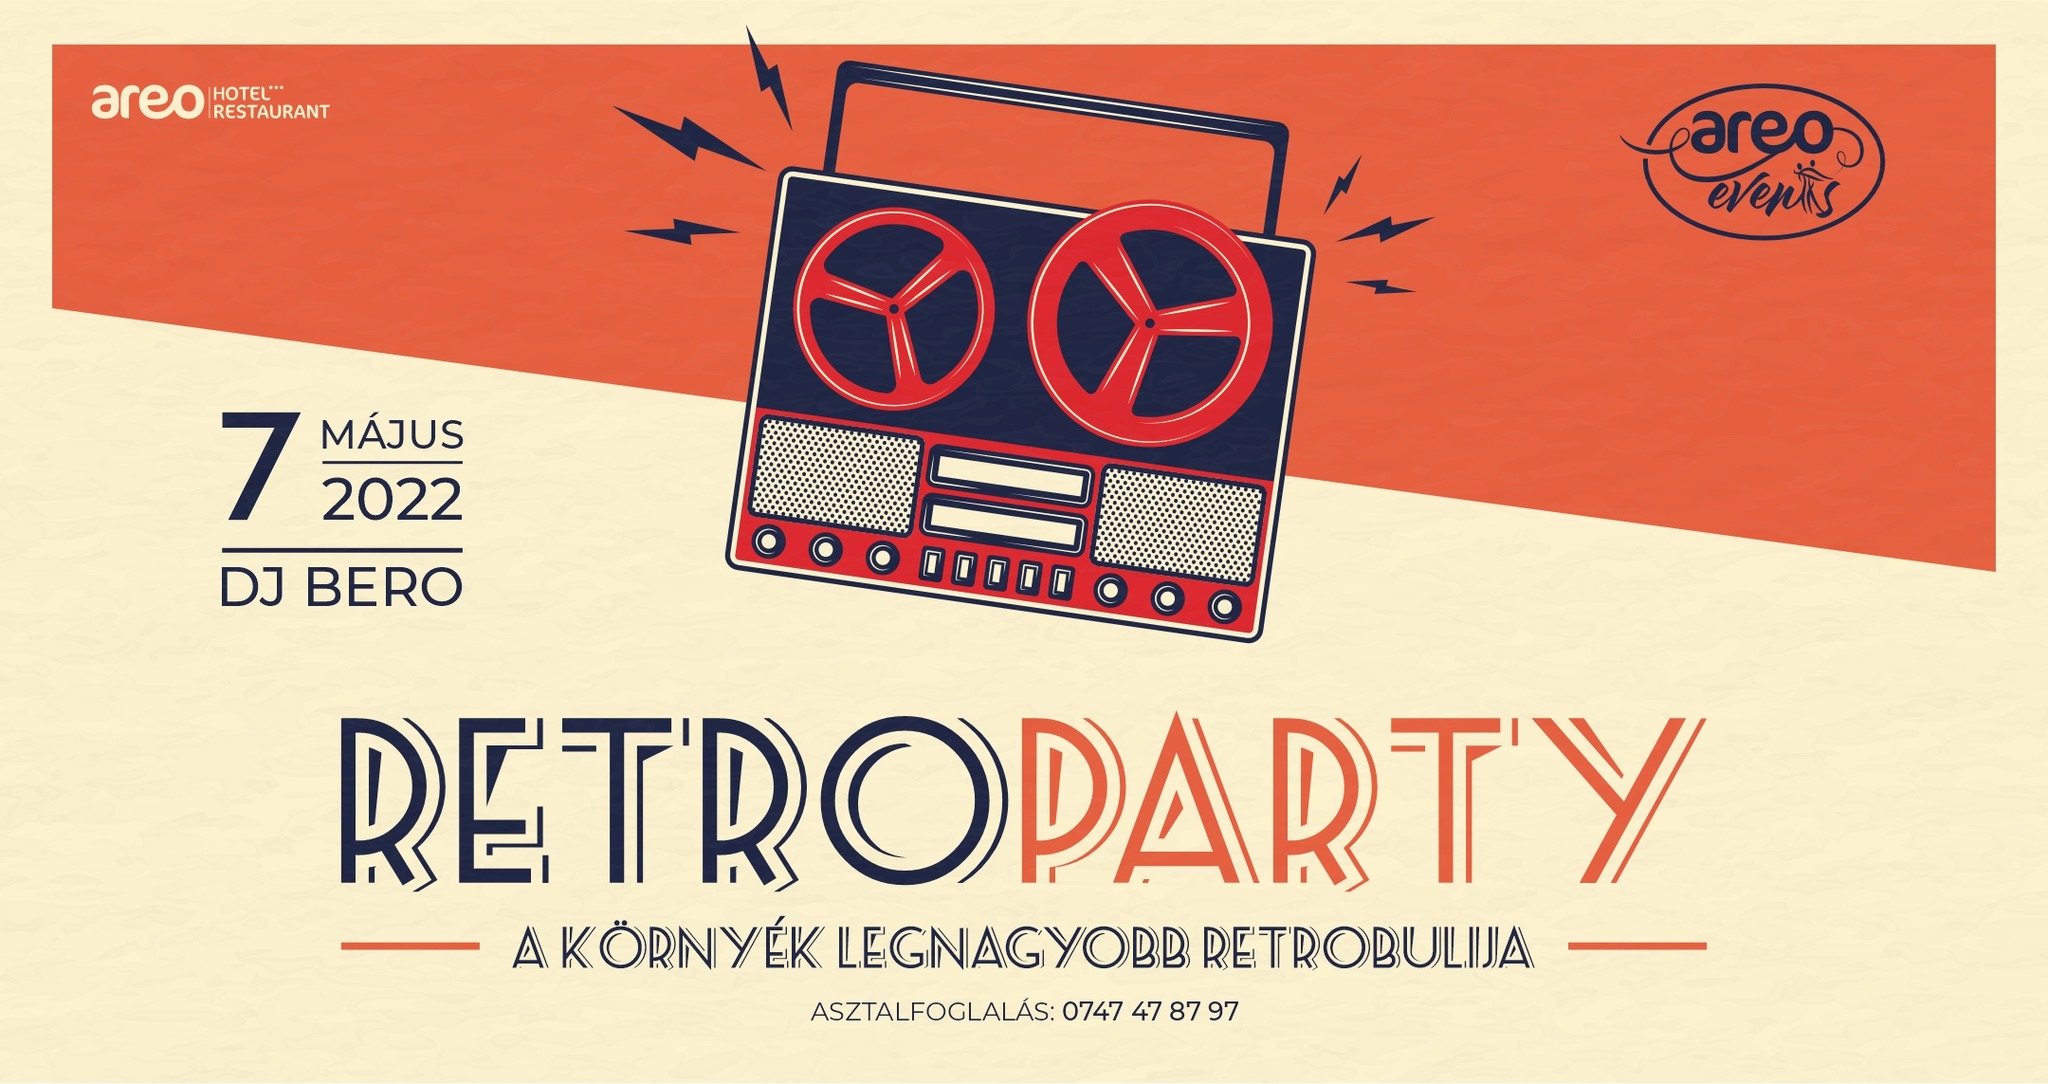 RETROPARTY